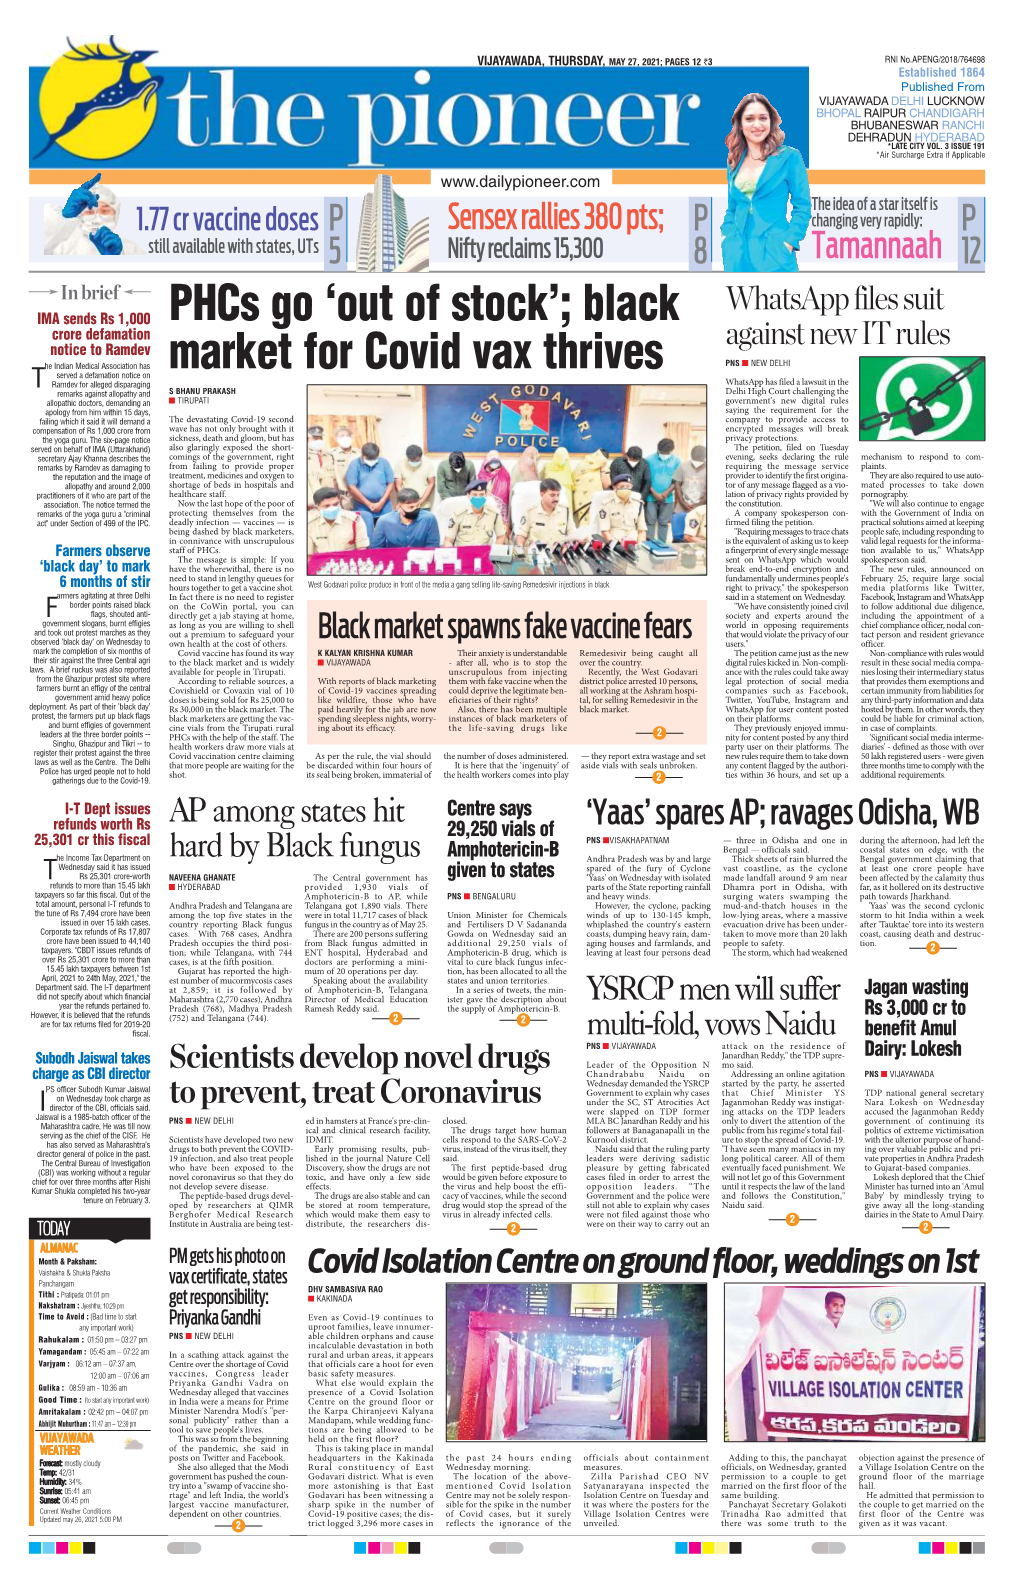 Phcs Go 'Out of Stock'; Black Market for Covid Vax Thrives